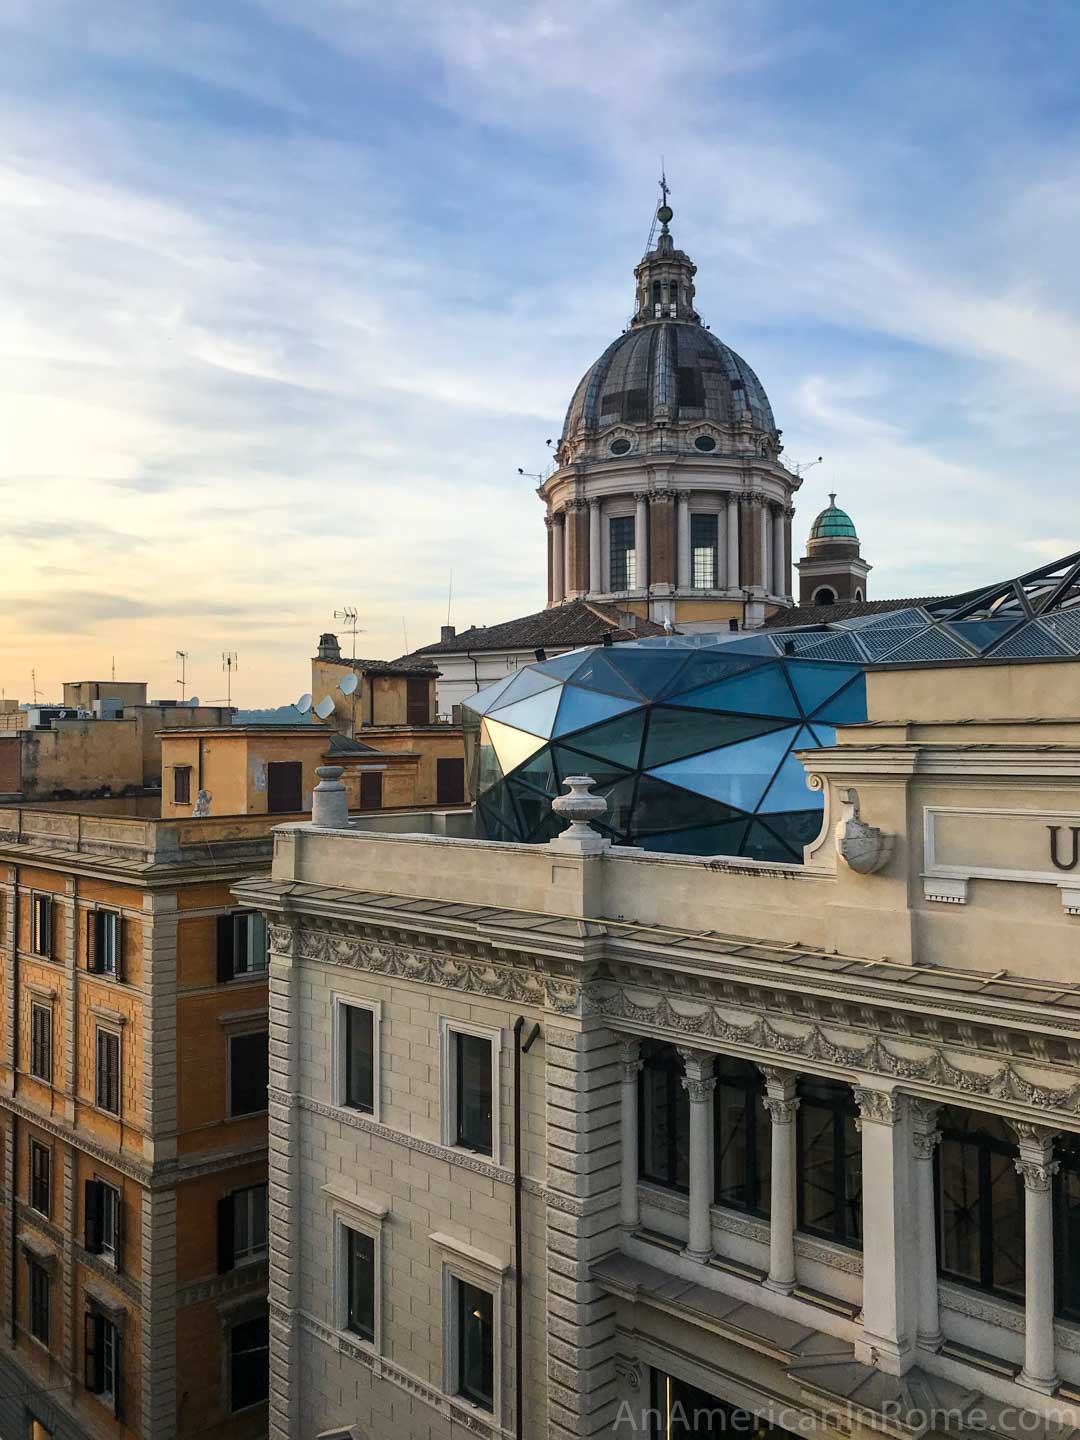 view of glass roof and dome from Zuma Rome